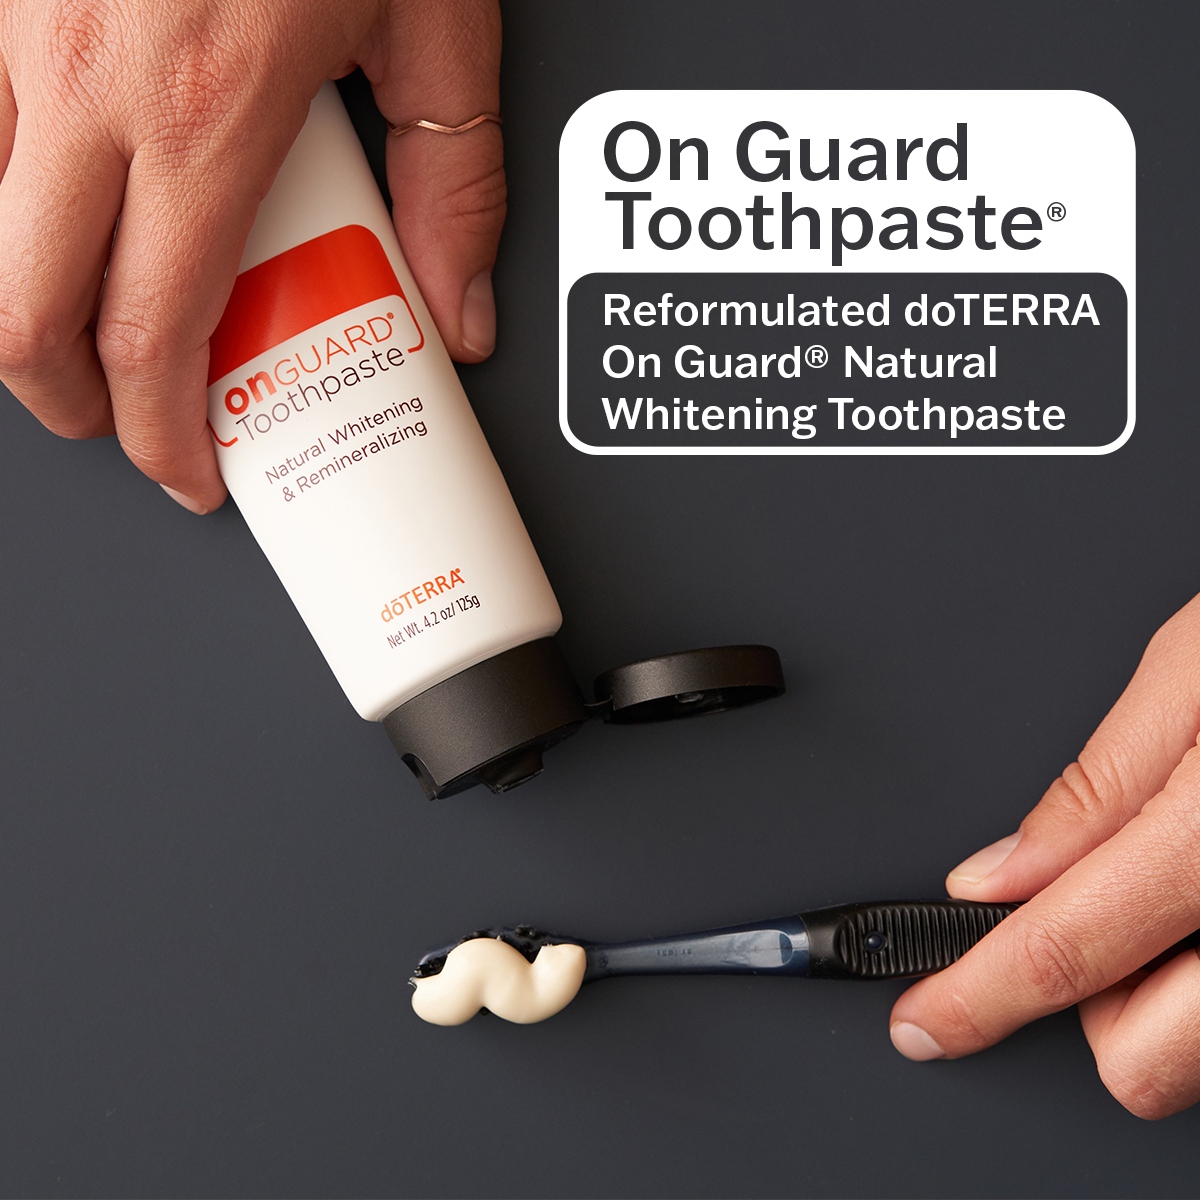 On Guard Toothpaste YouTube.jpg